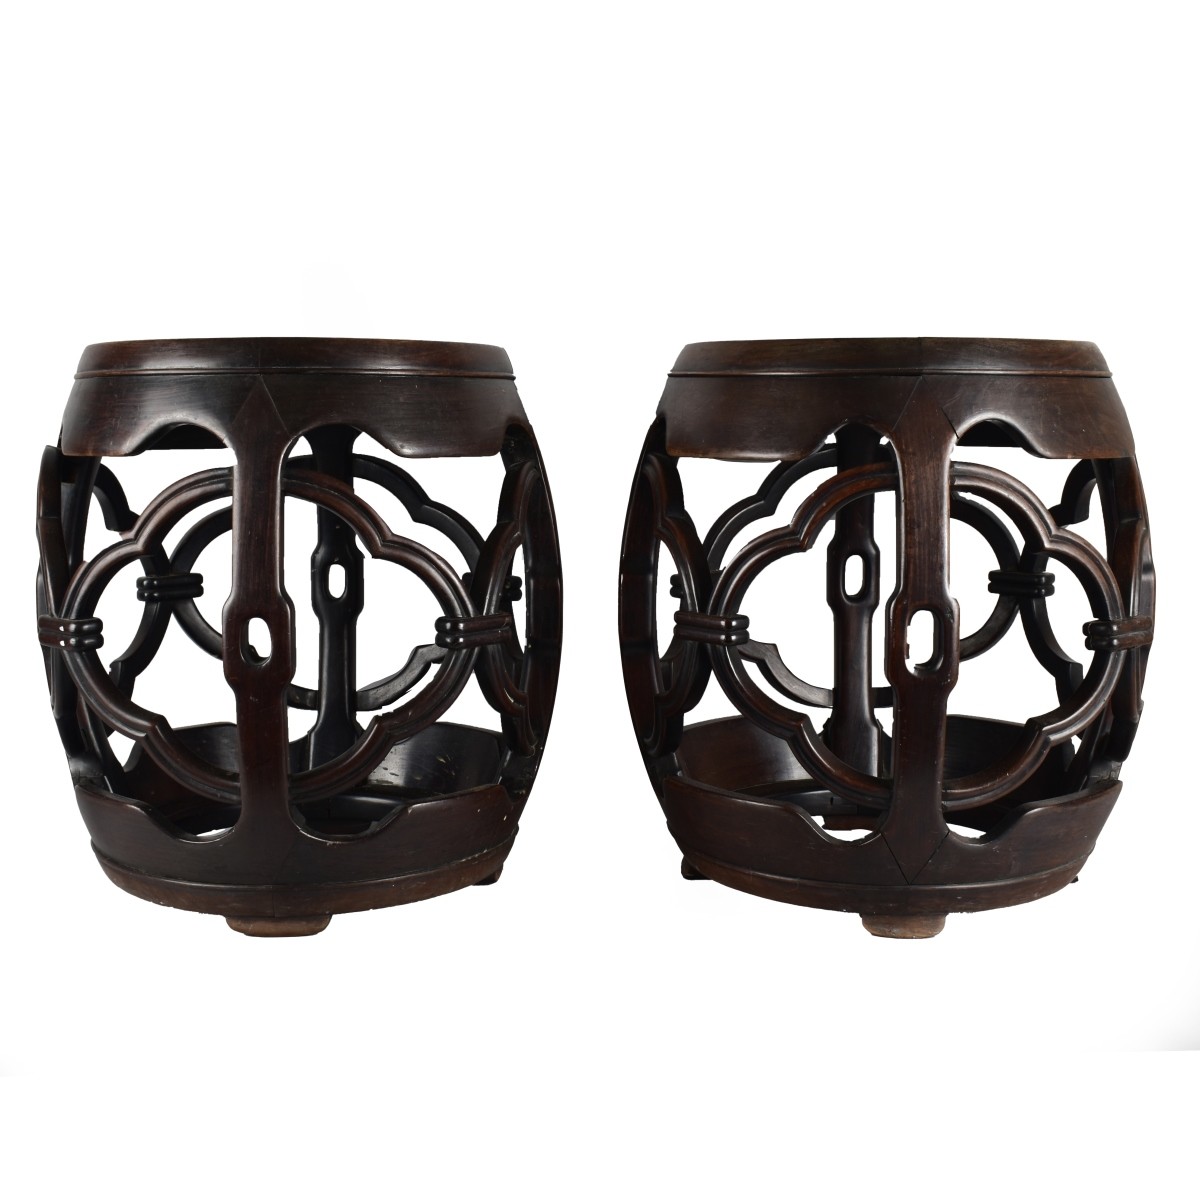 Pair of Chinese Barrel Form Stools / Garden Seats